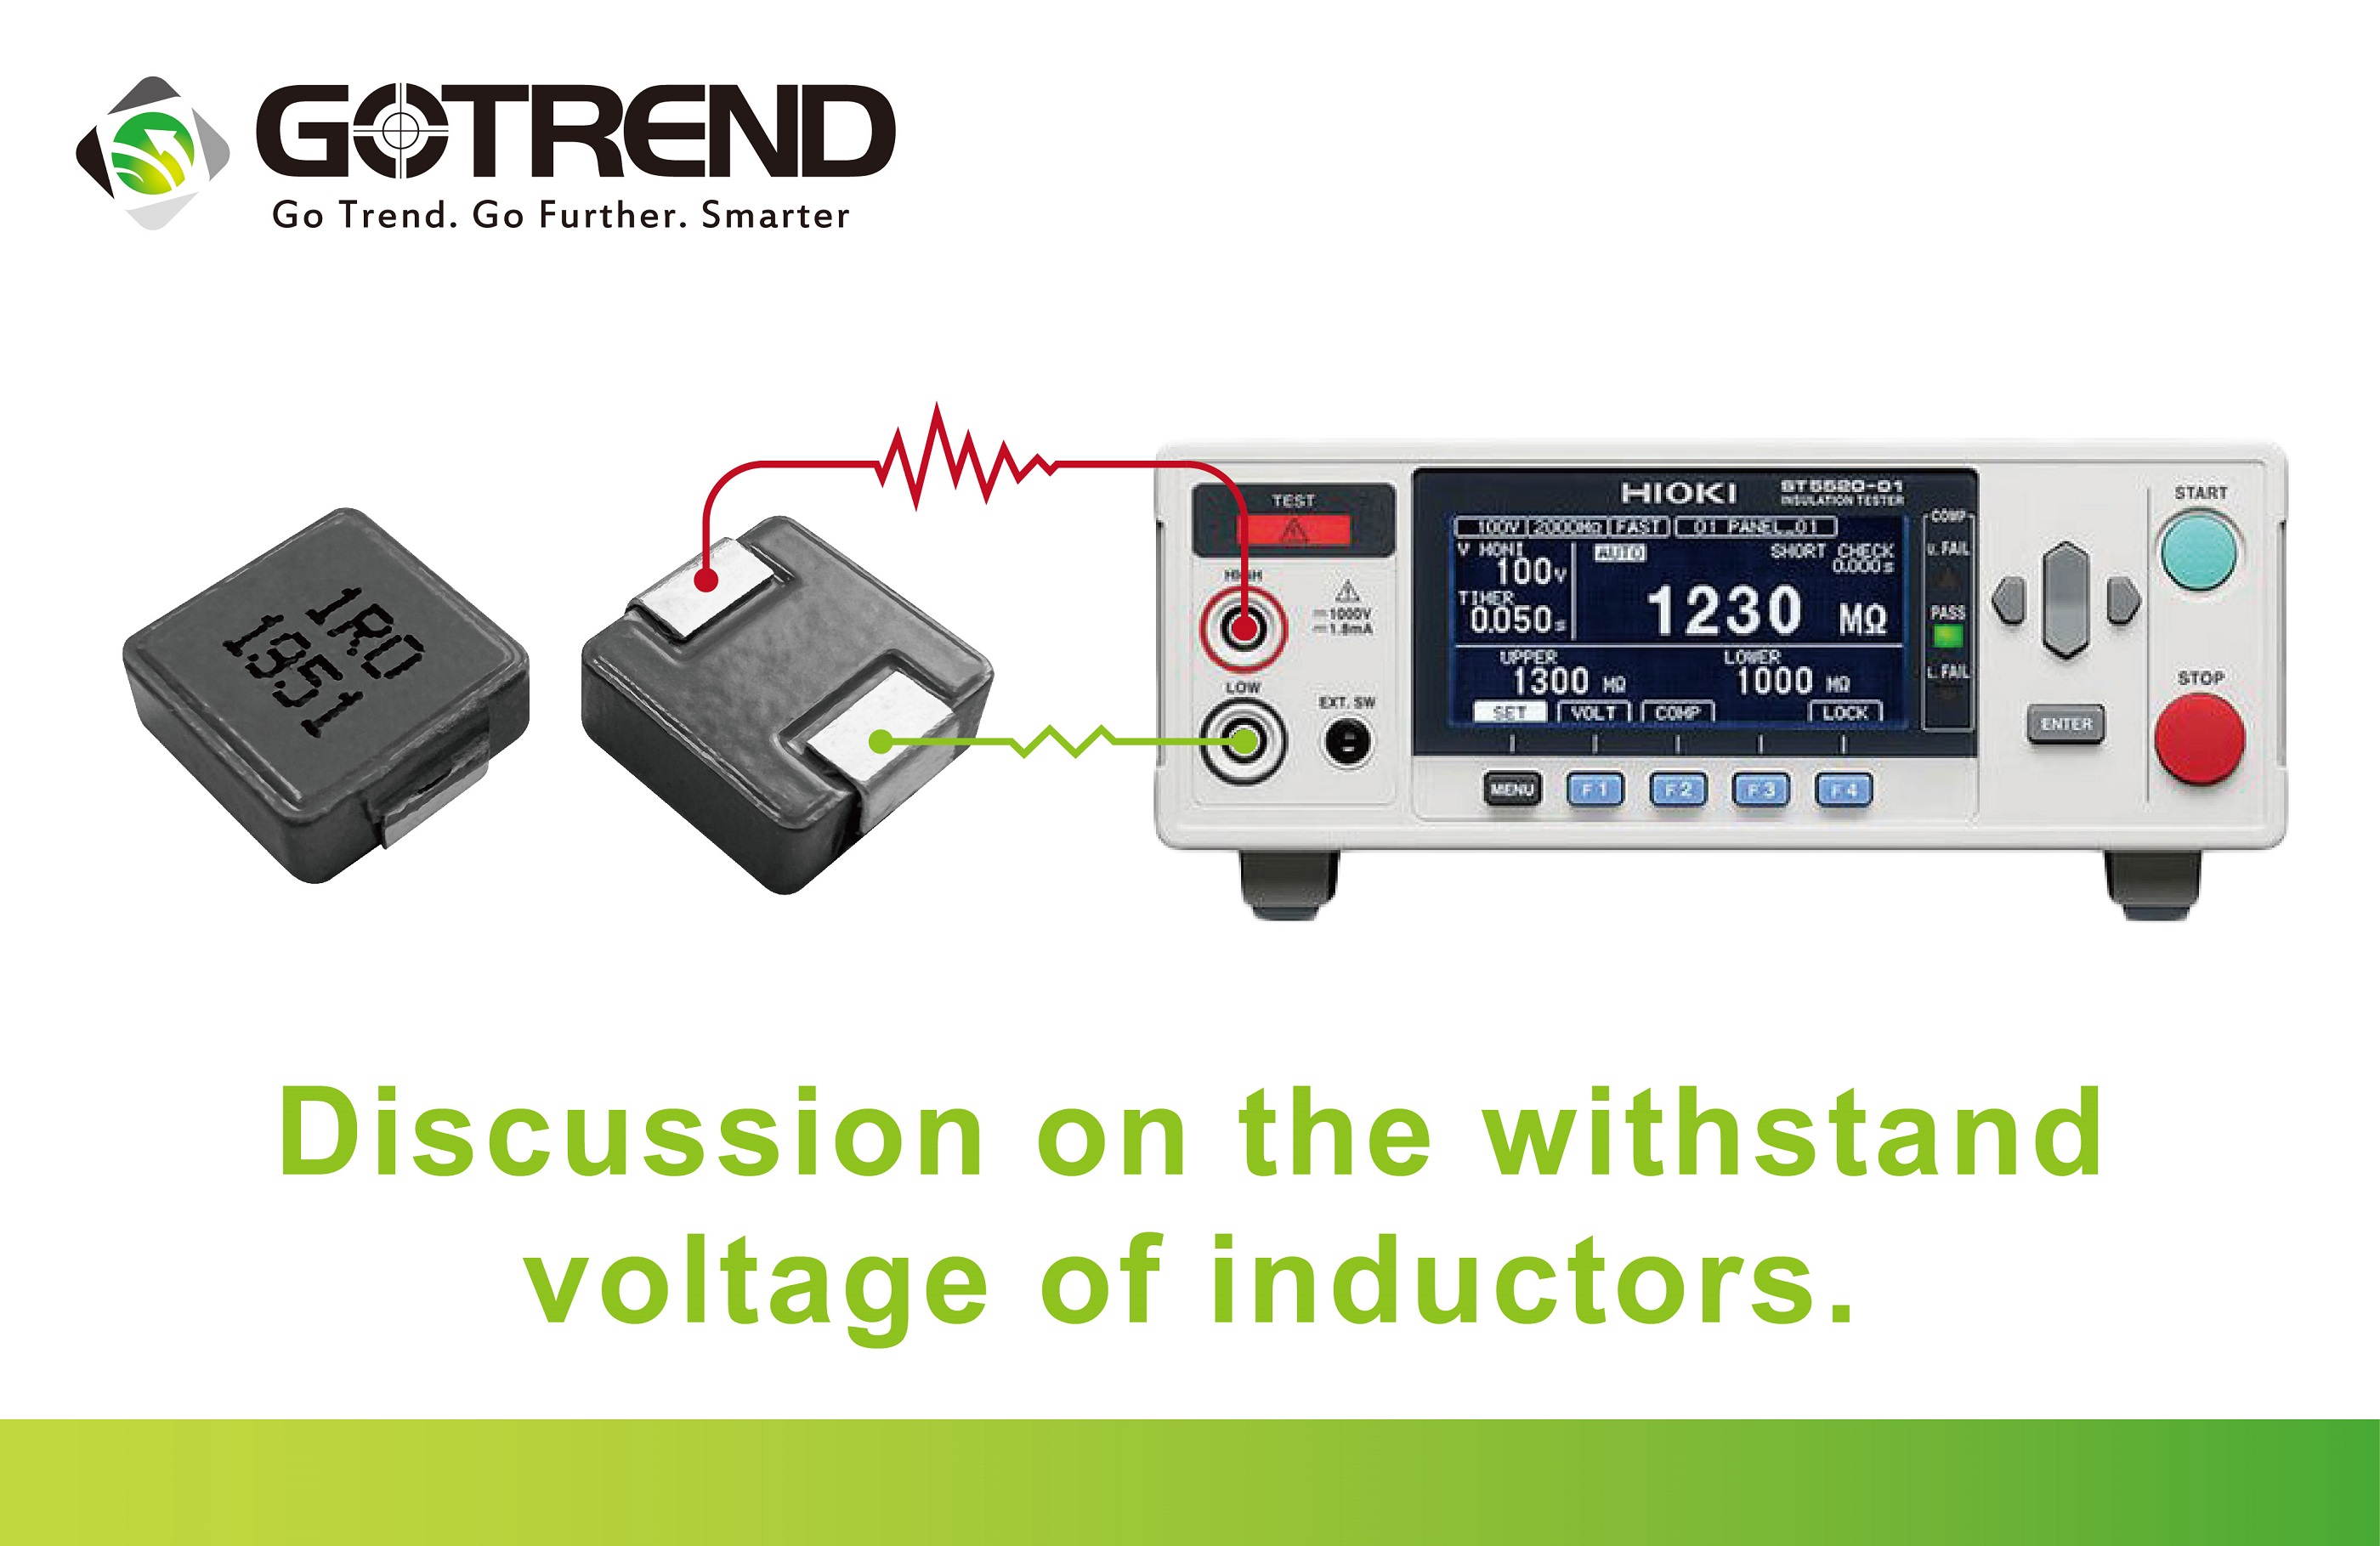 In-depth Analysis of Inductor Voltage Endurance